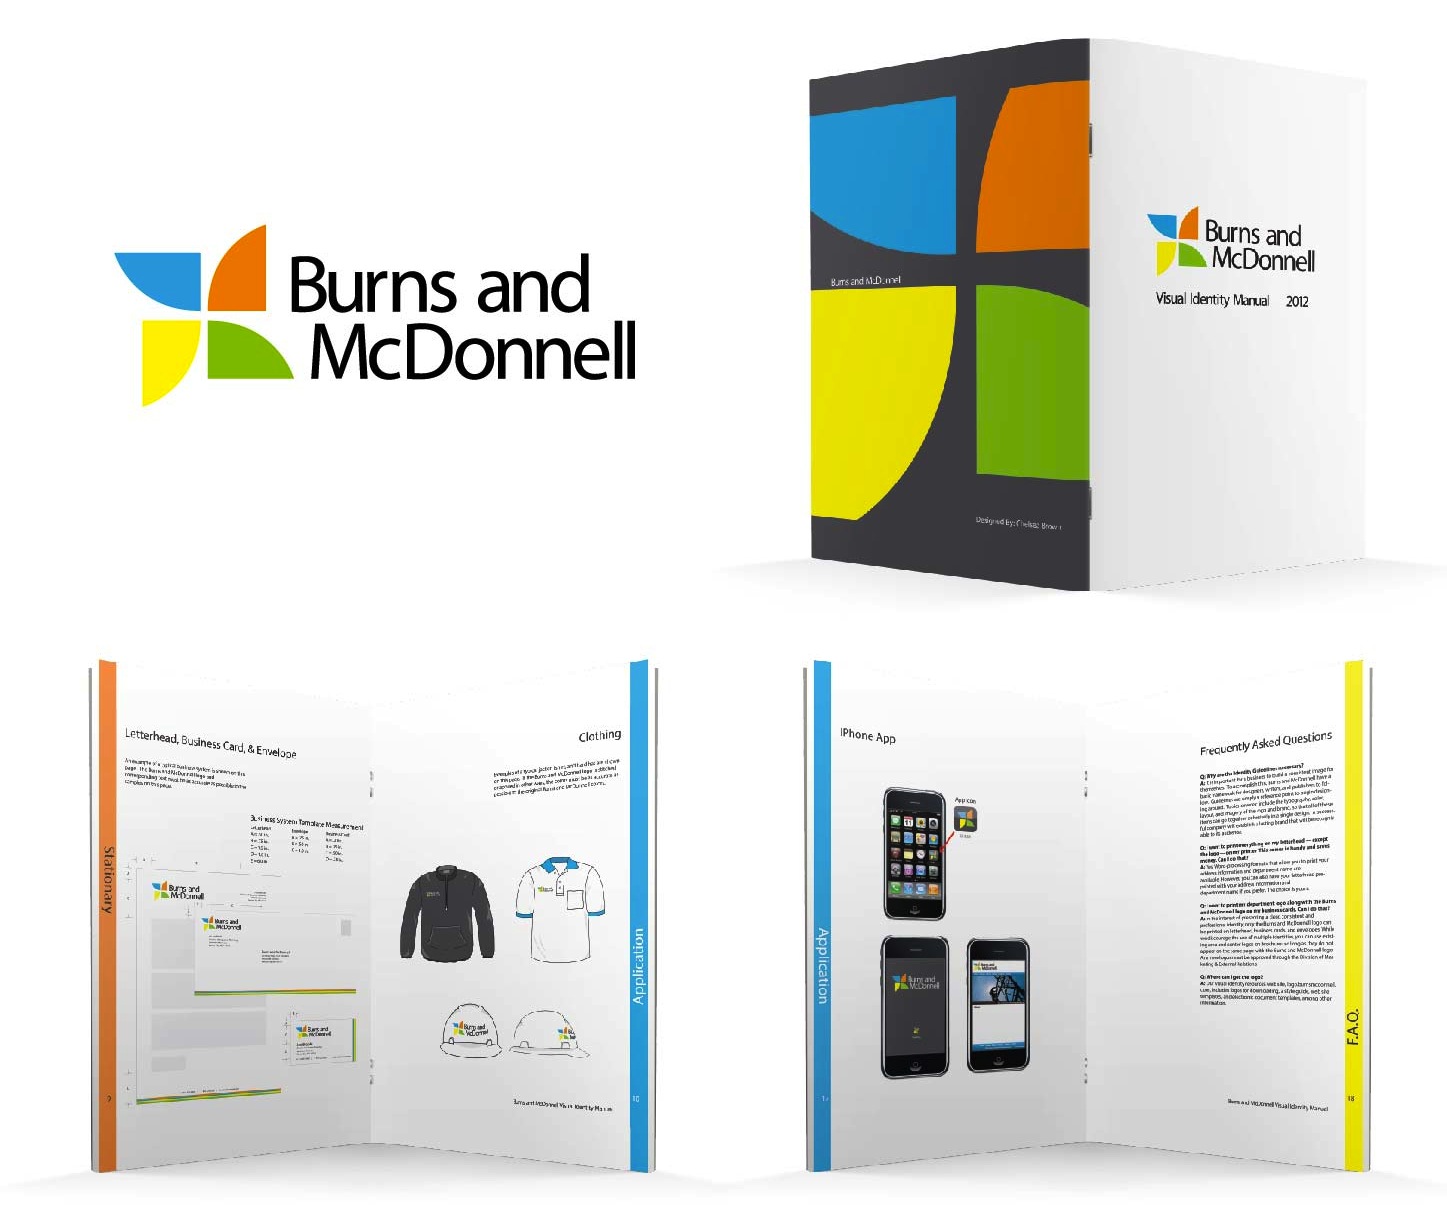 Burns and McDonnell Identity Guide